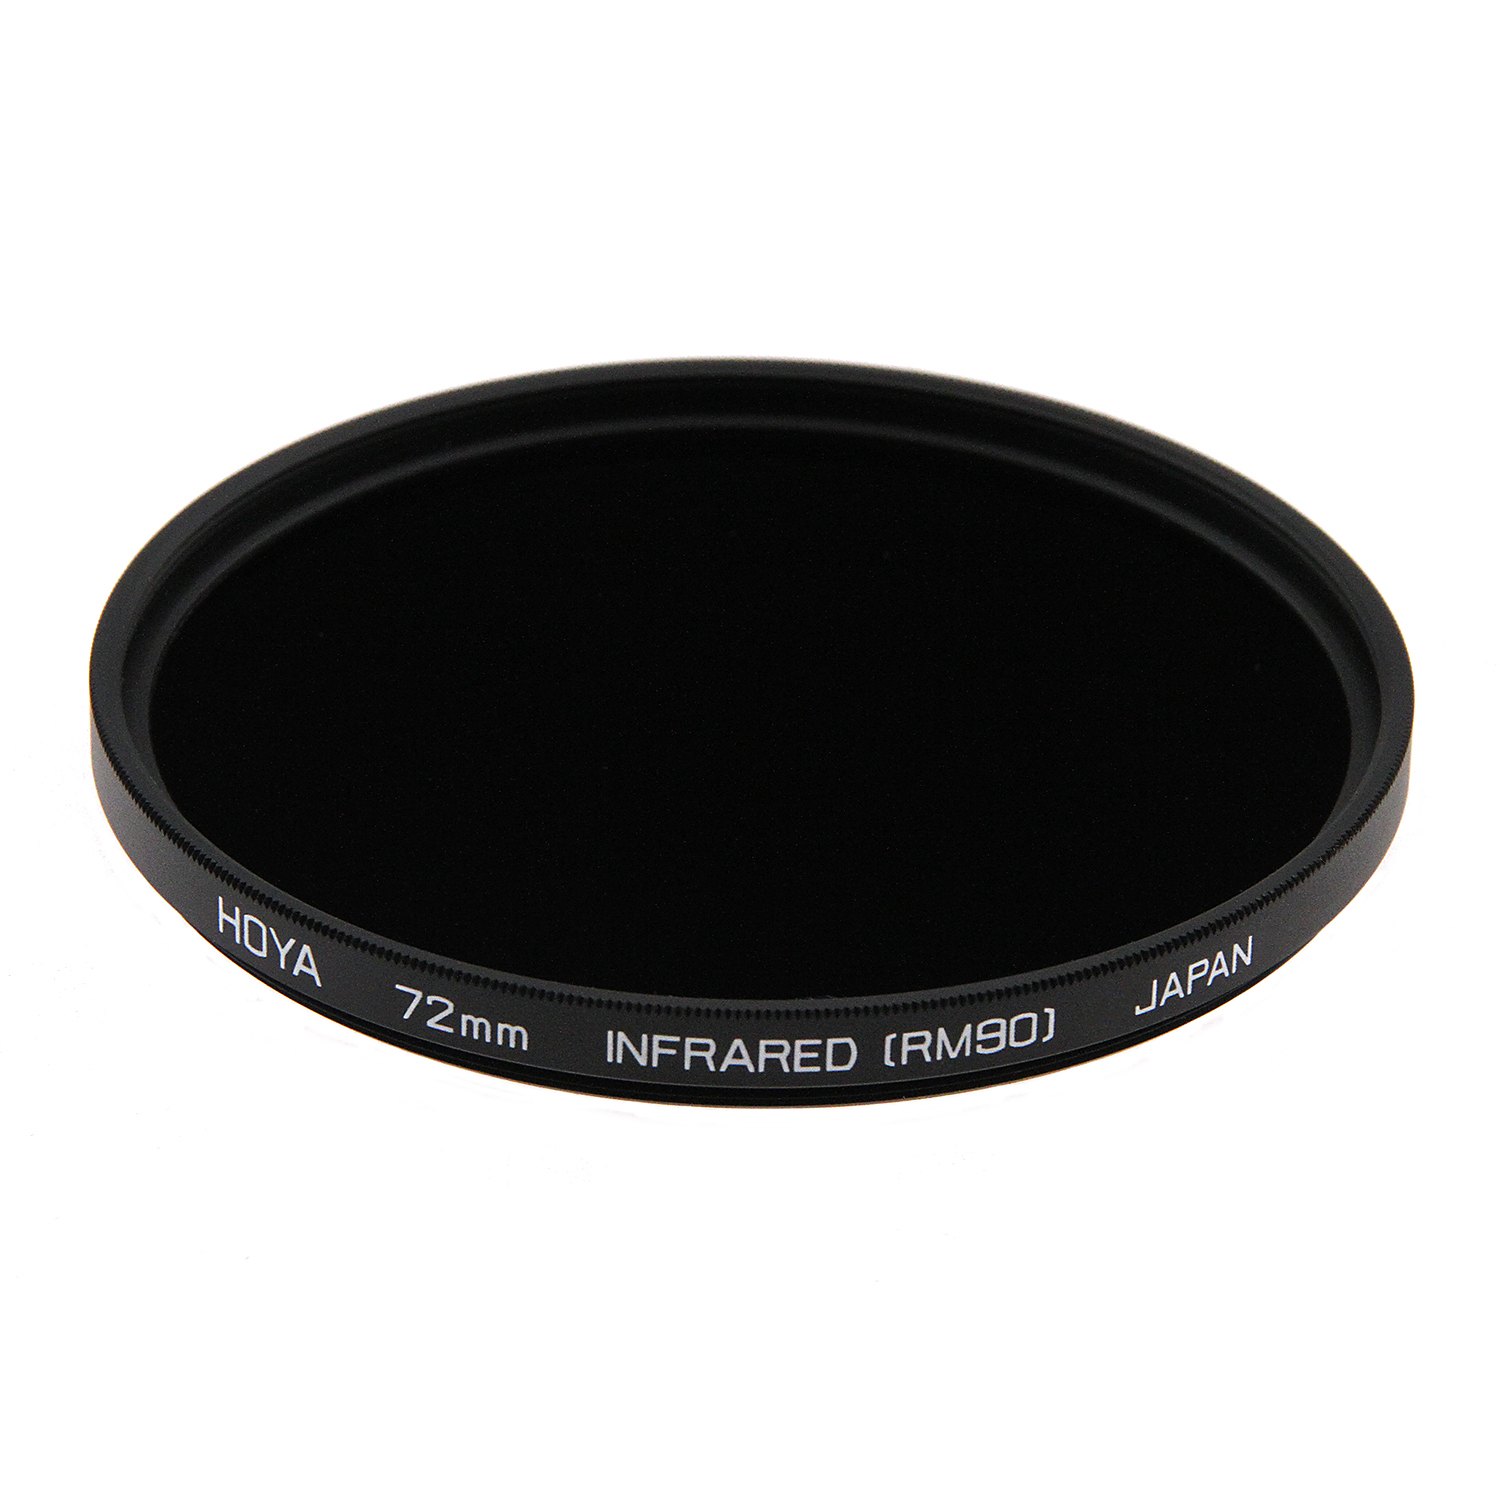 UPC 024066015570 product image for 72mm RM90 Infrared Filter | upcitemdb.com